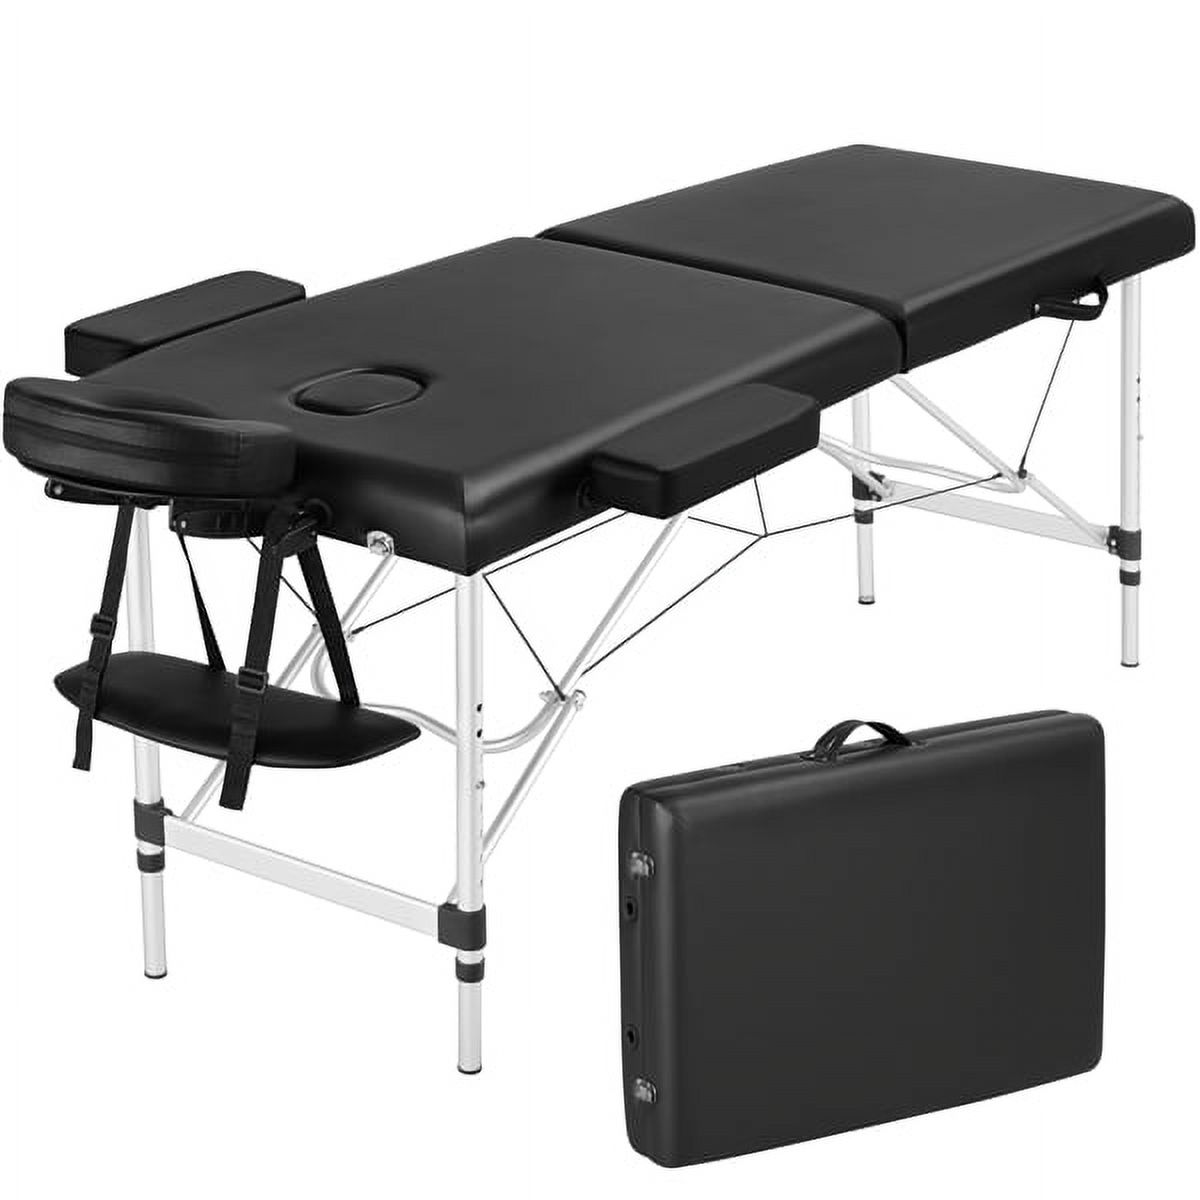 SmileMart 3 Section 84" Portable Adjustable Aluminum  Massage Table for Spa Treatments, Black - image 3 of 13